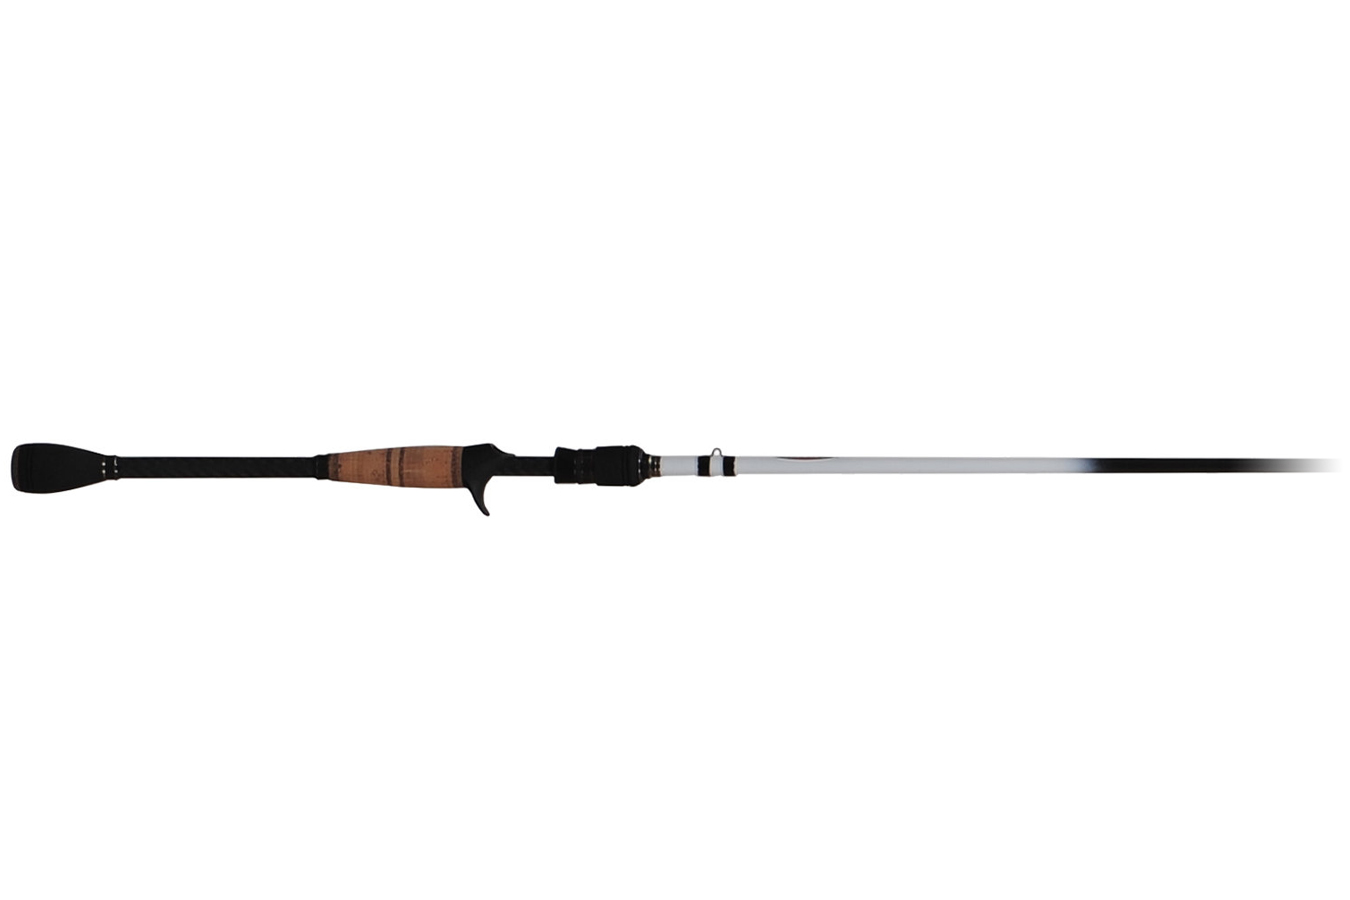 Discount Duckett Fishing Black Ice 7' 3, Medium Heavy Action for Sale, Online Fishing Rods Store